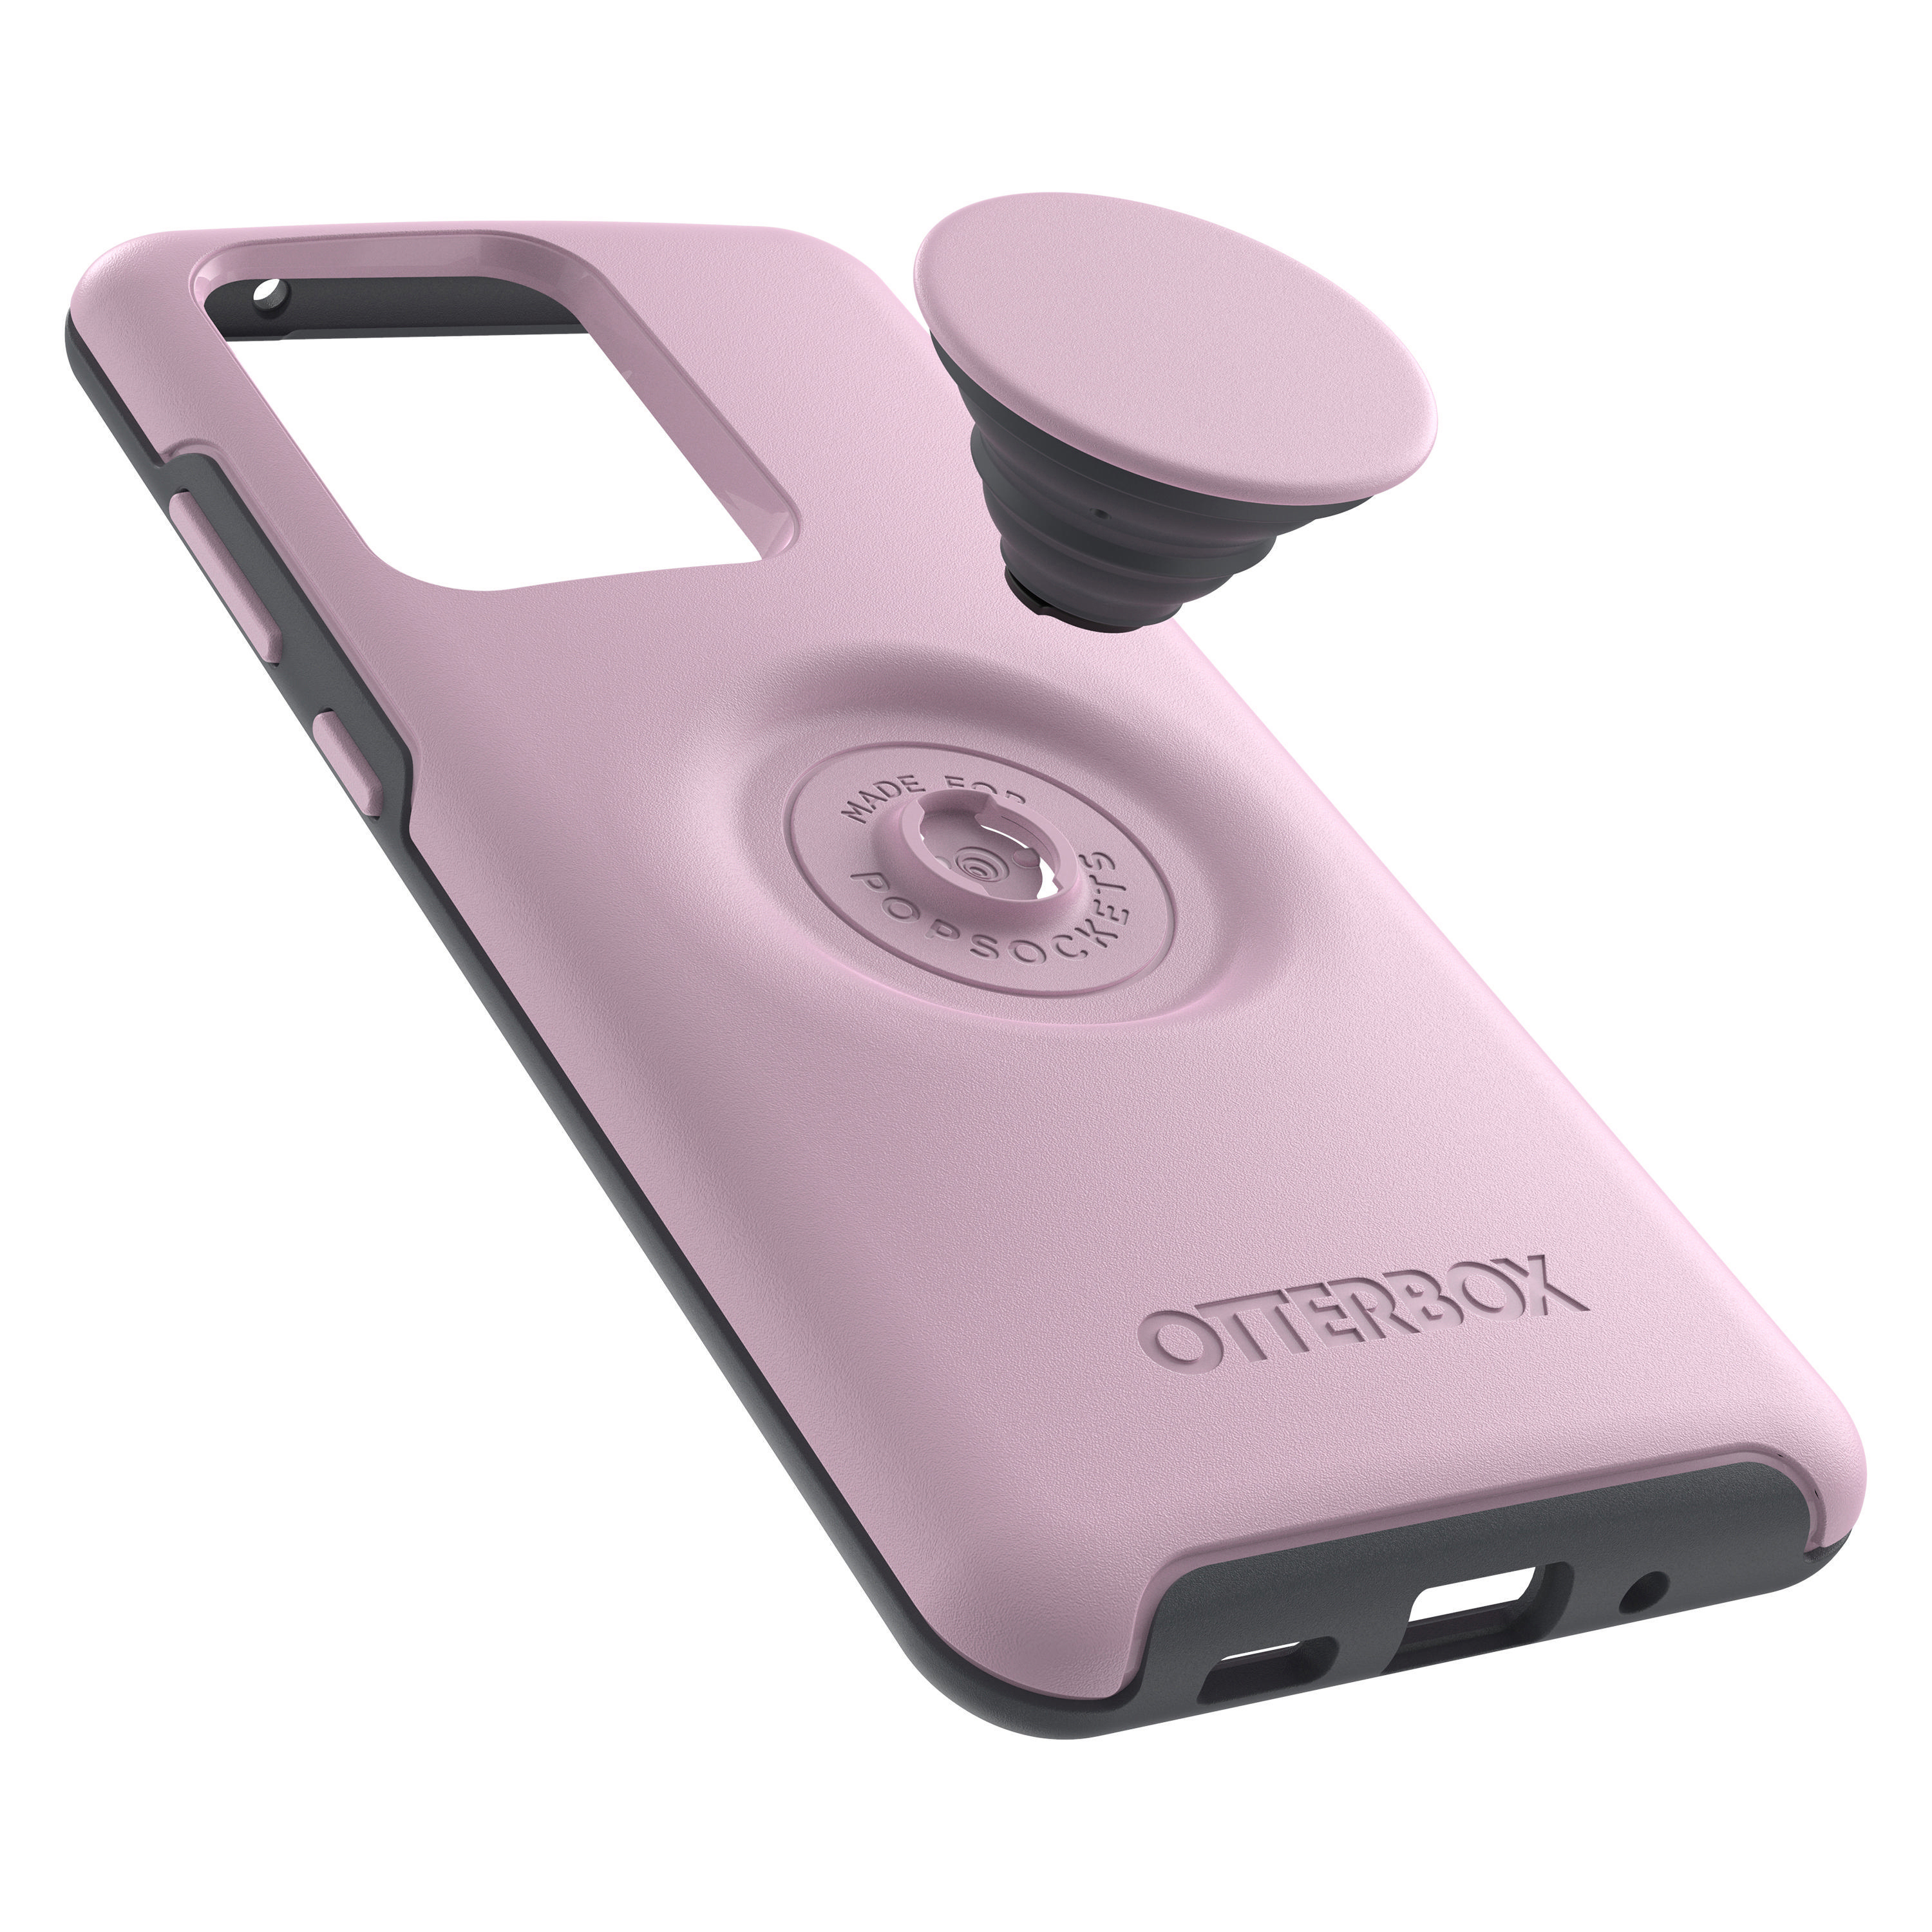 OTTERBOX Backcover, 77-64239, S20 Pink Ultra, Galaxy Samsung,